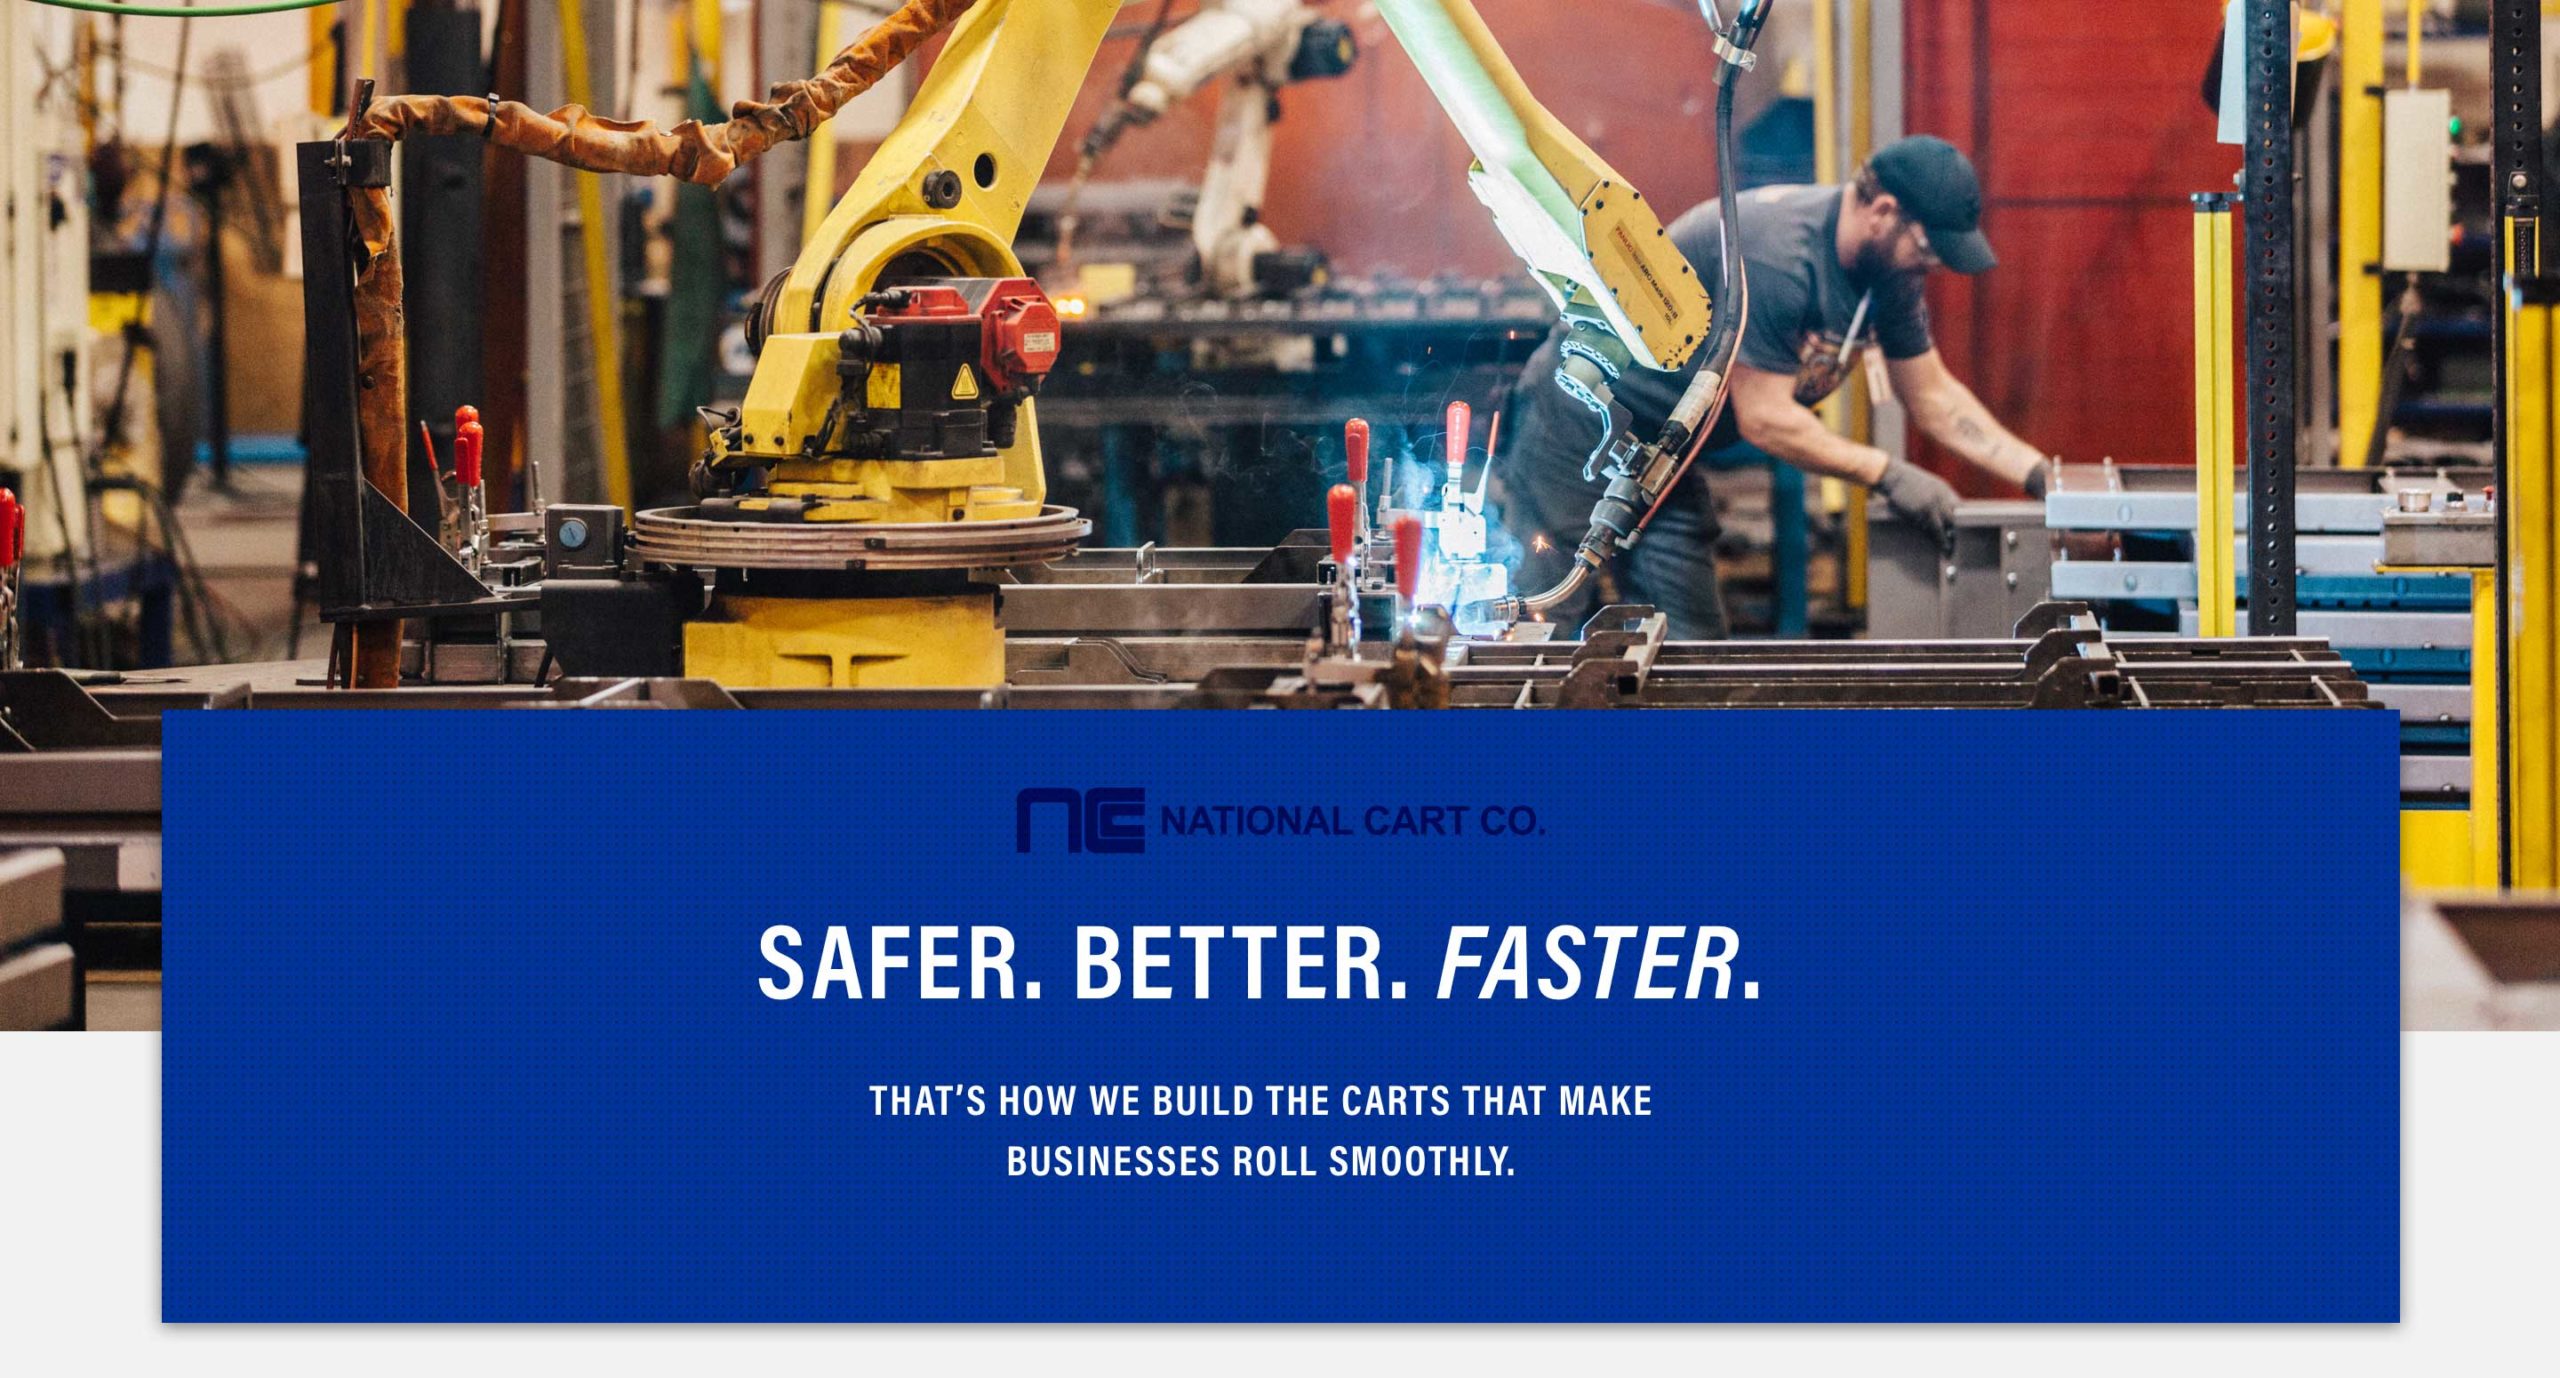 Image from National Cart Co.'s website design with a welder making a cart